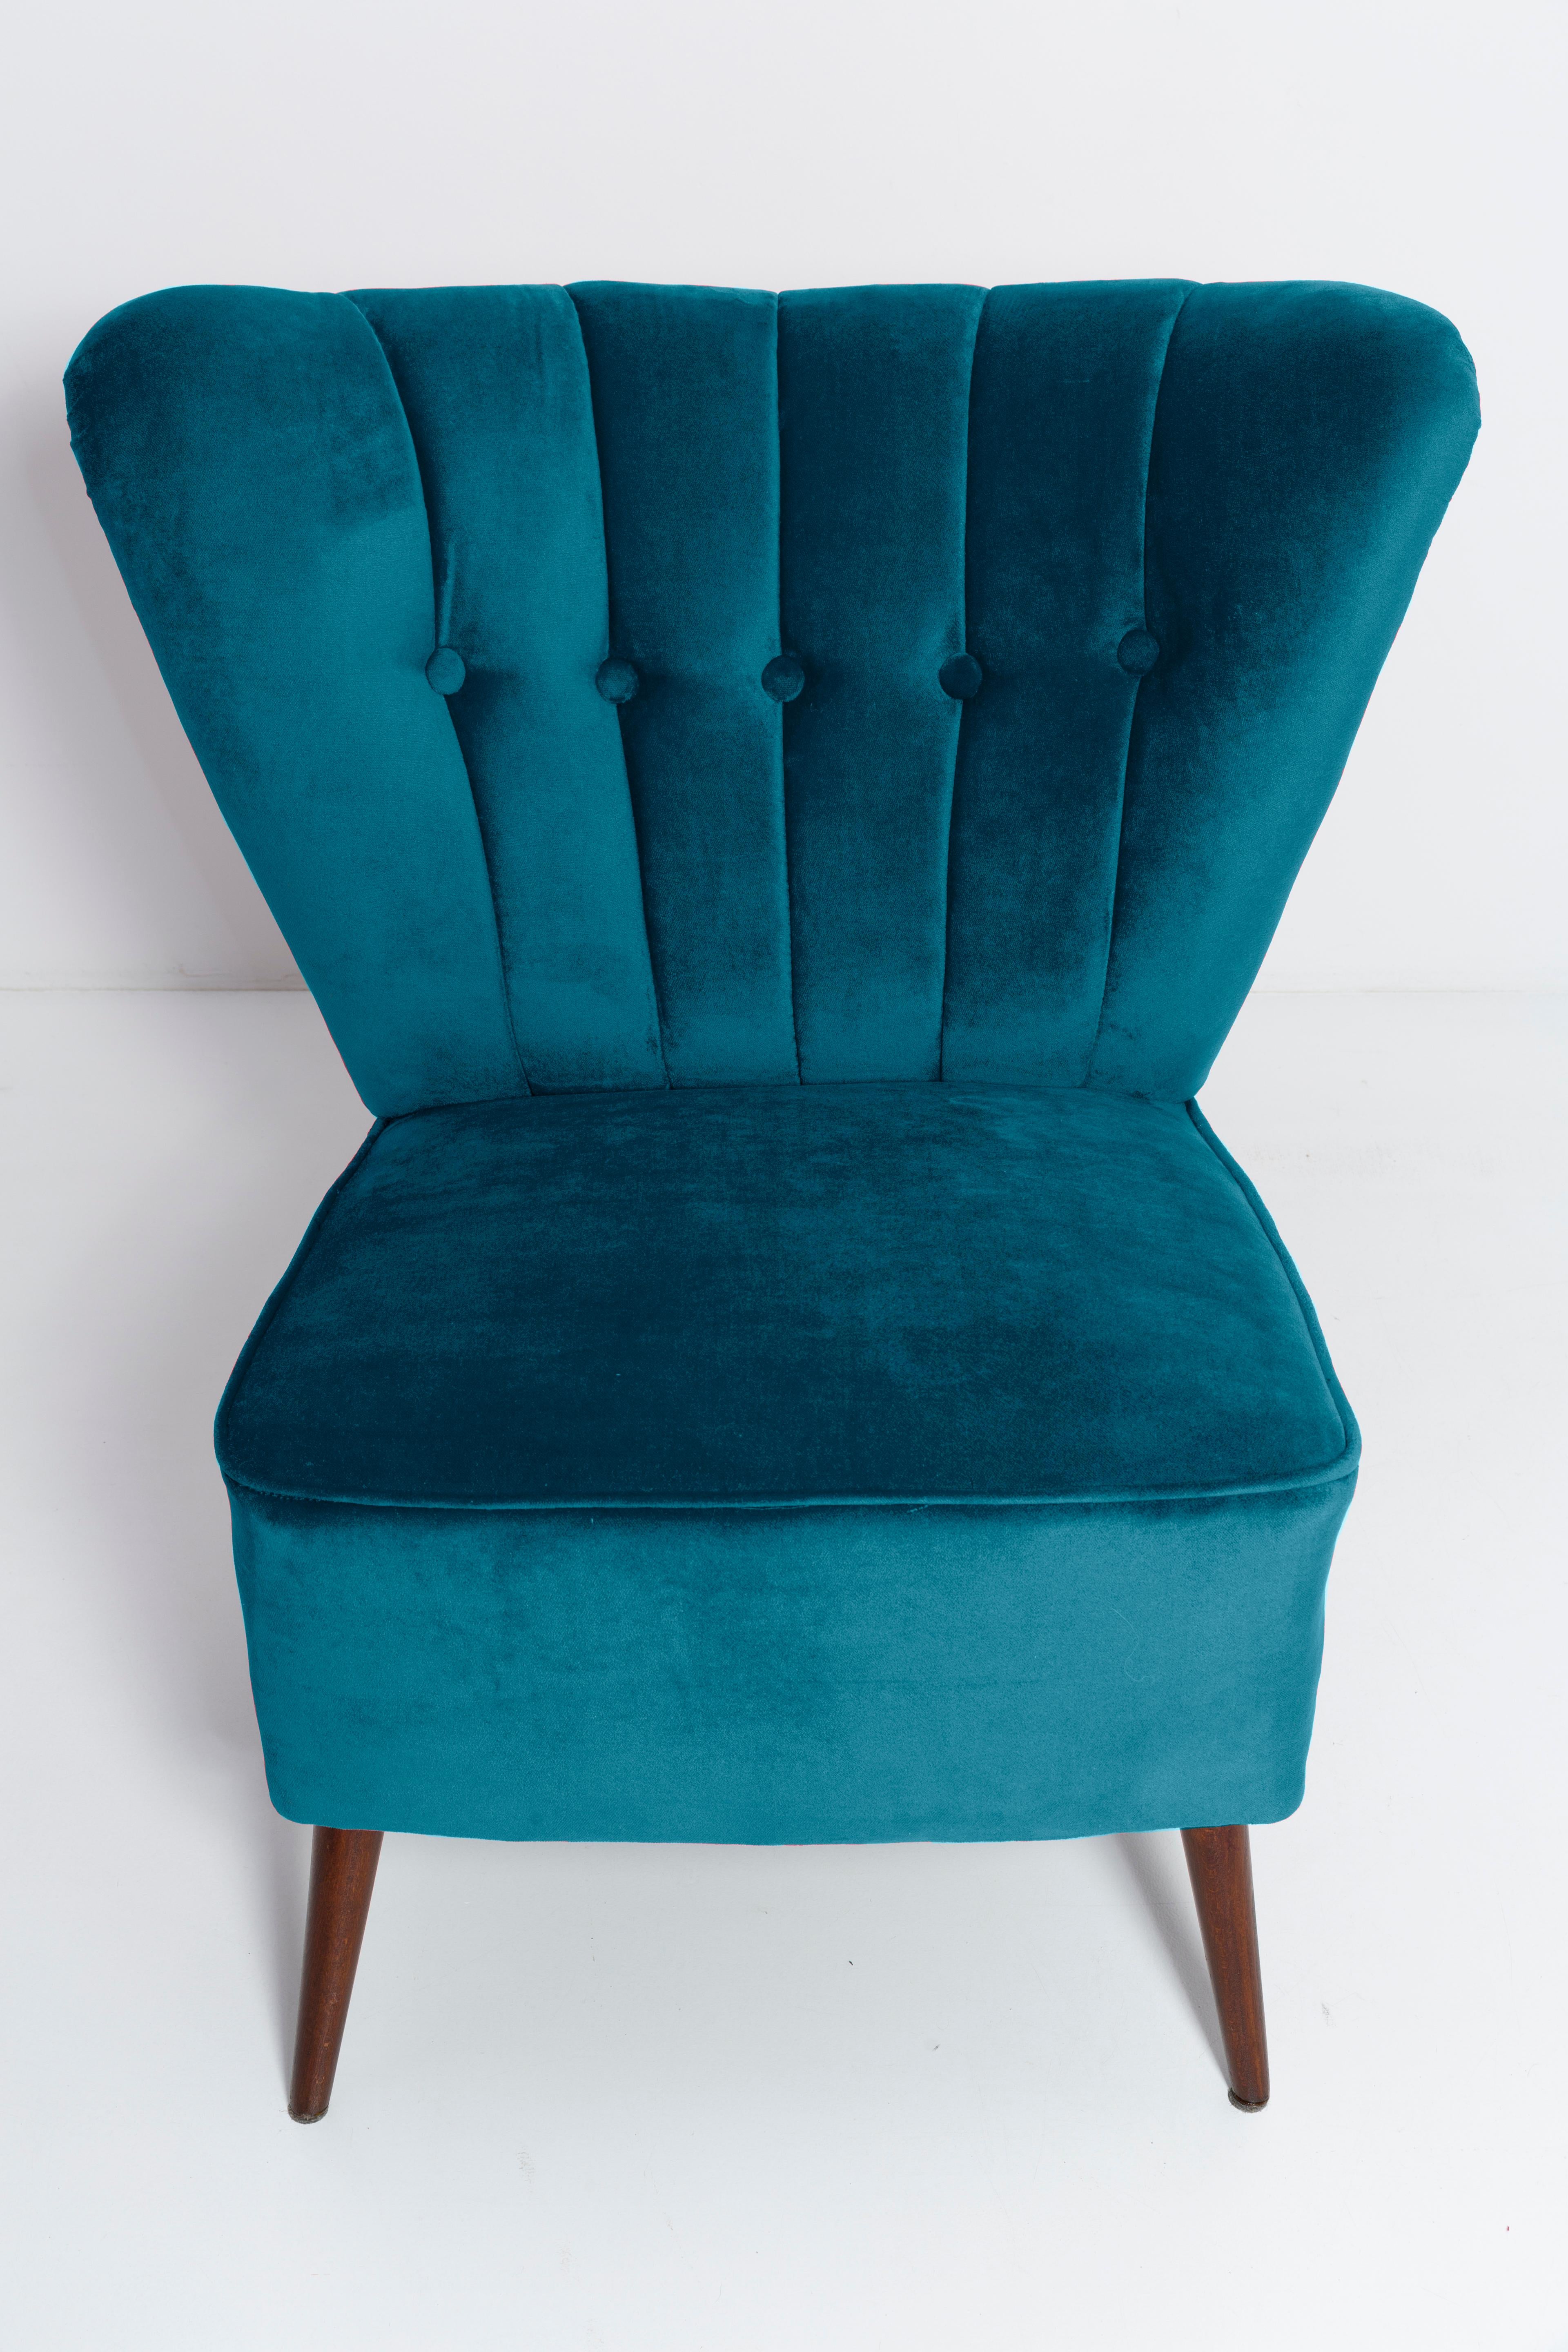 20th Century Set of Two Midcentury Petrol Blue Velvet Club Armchairs, Europe, 1960s For Sale